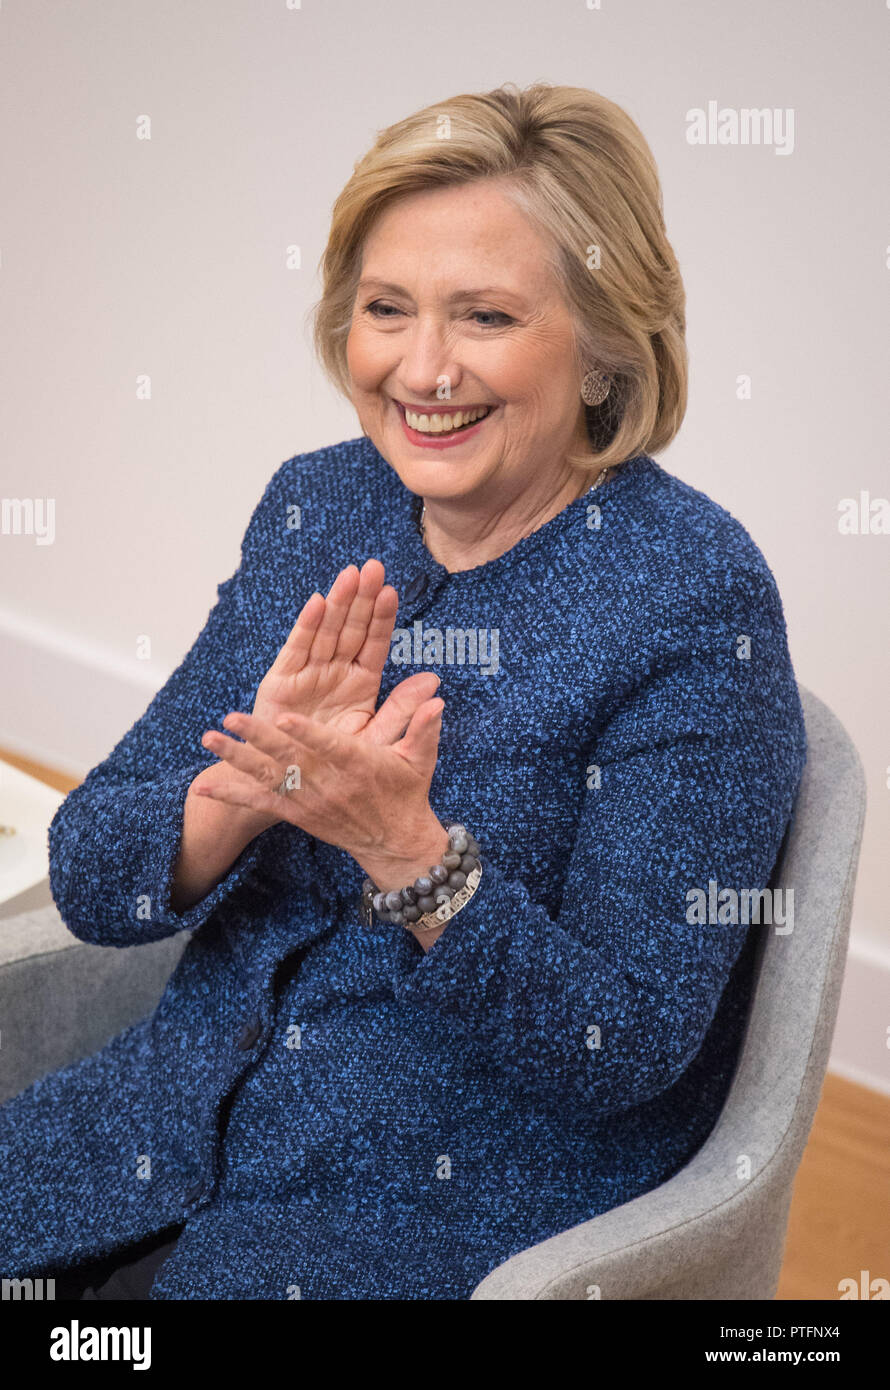 Hillary Clinton delivers her keynote speech at the Bonavero Institue of Human Rights, at Oxford University's Mansfield College, as part of a series of events to honour the 70th anniversary of the Universal Declaration of Human Rights. Stock Photo